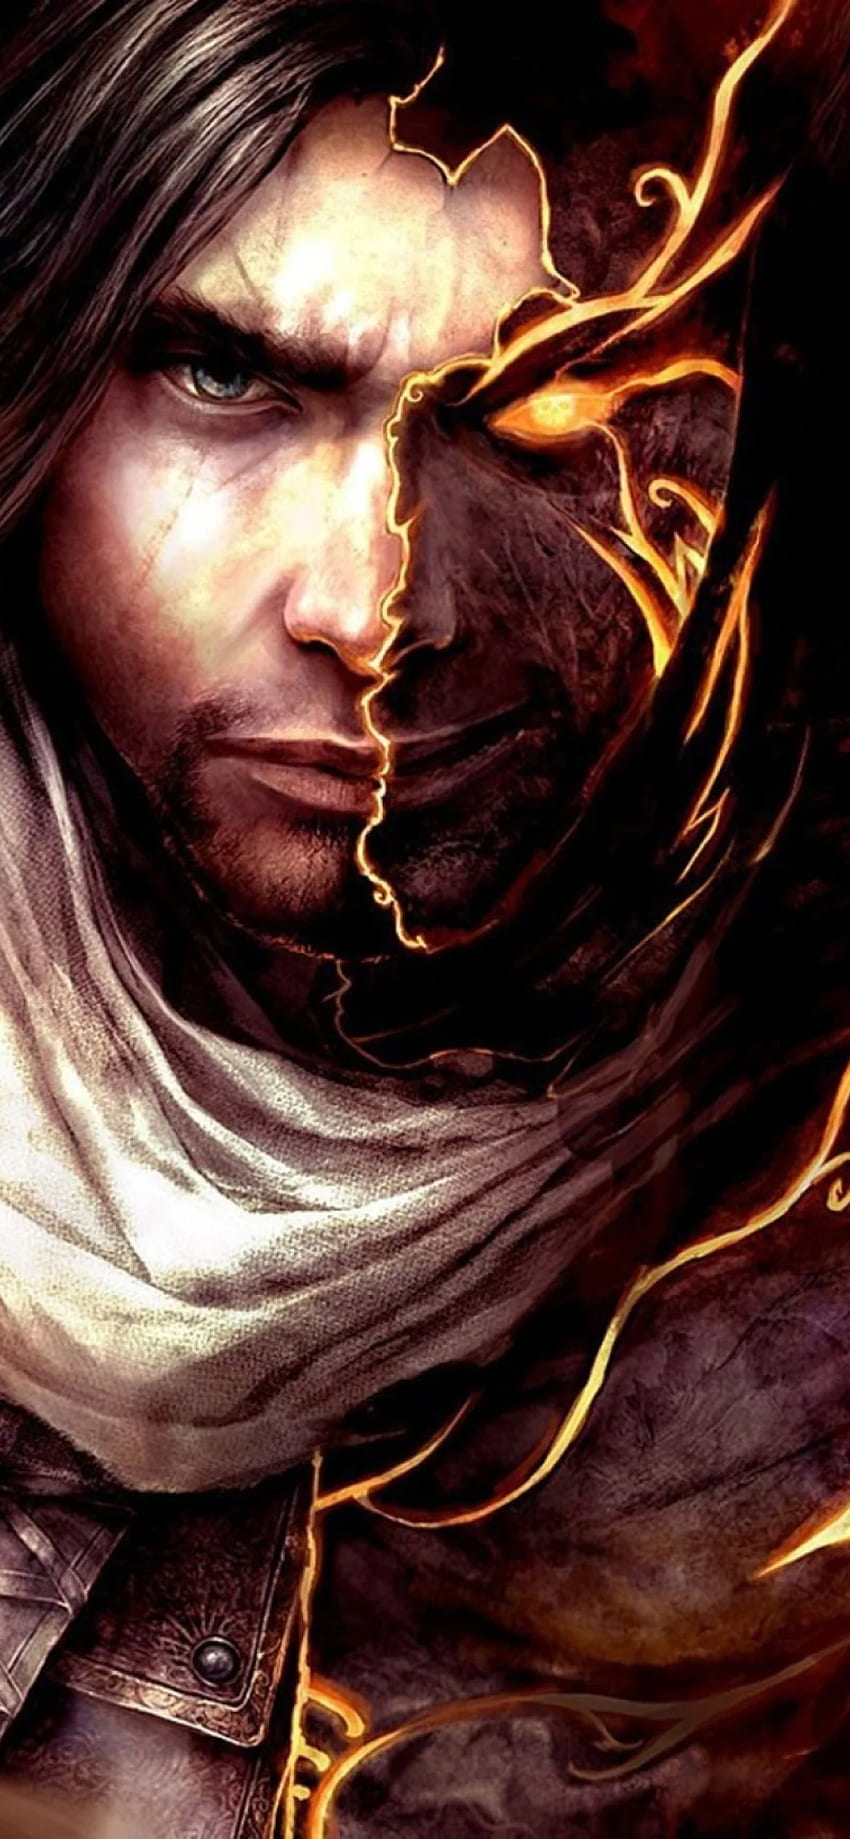 Prince Of Persia - The Two Thrones for iPhone 11, Prince of Persia iPhone HD phone wallpaper